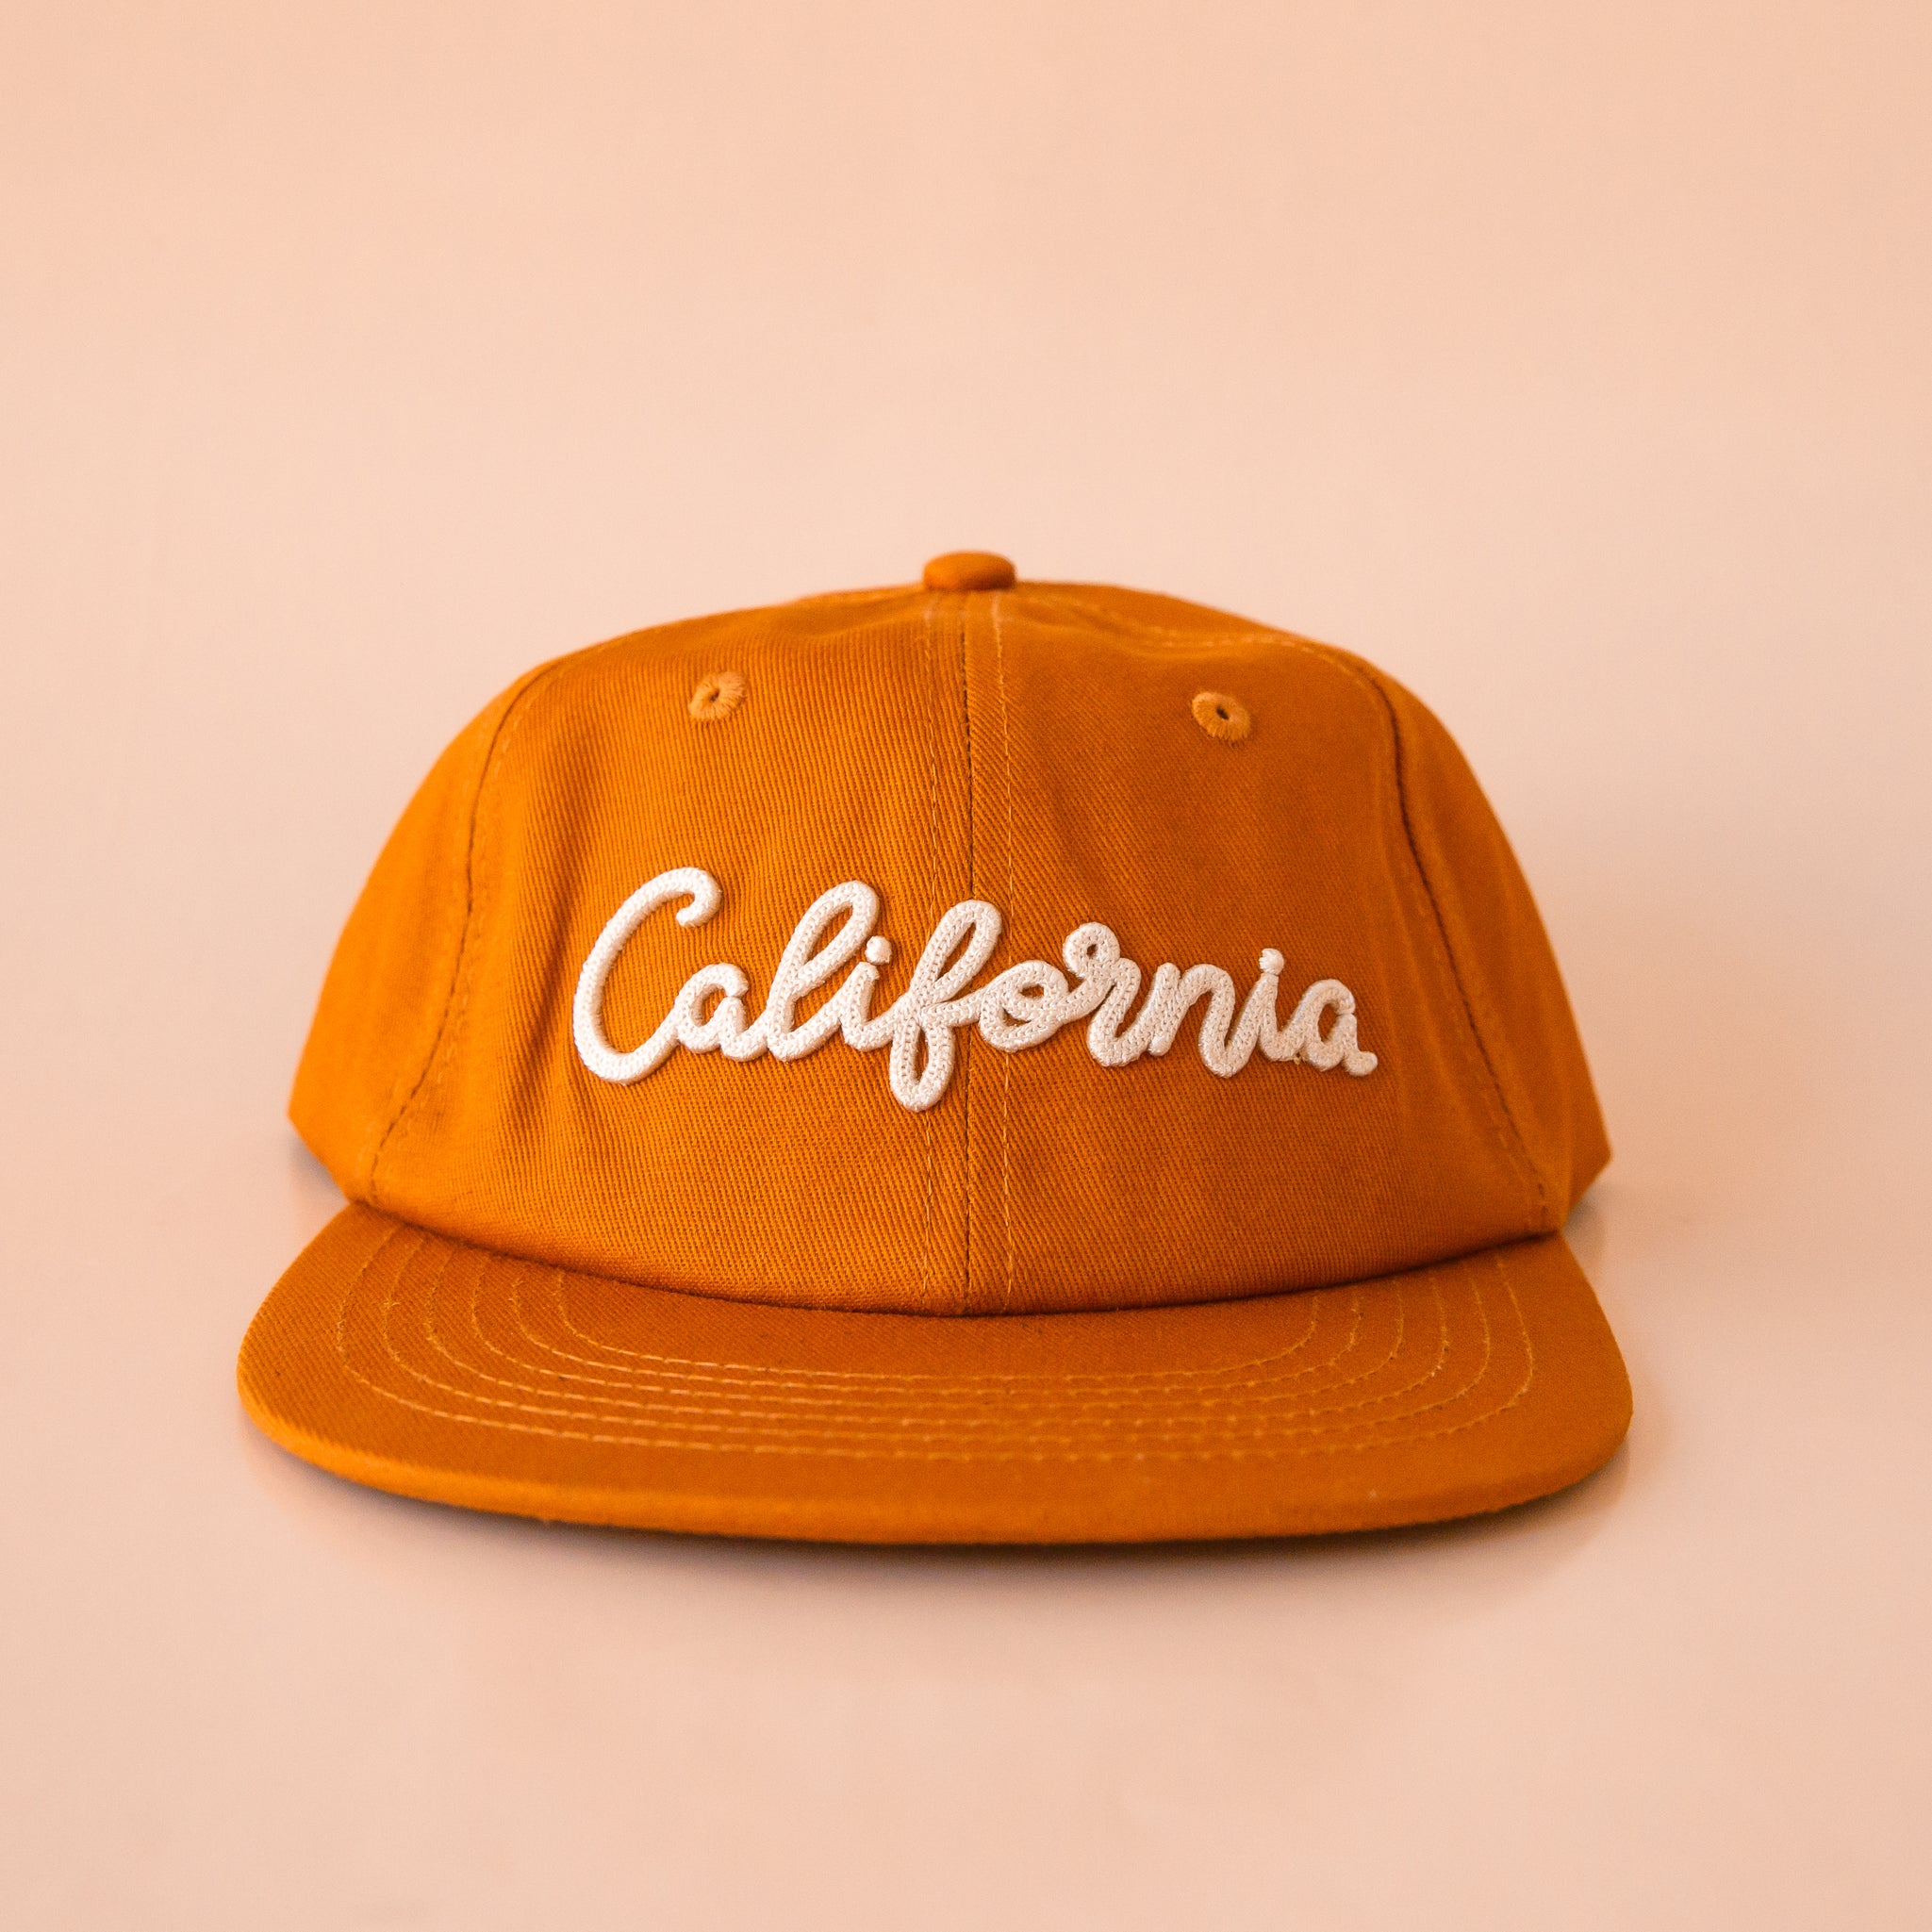 A burnt orange flat brimmed baseball hat with ivory embroidered text that reads, "California" across the front.  